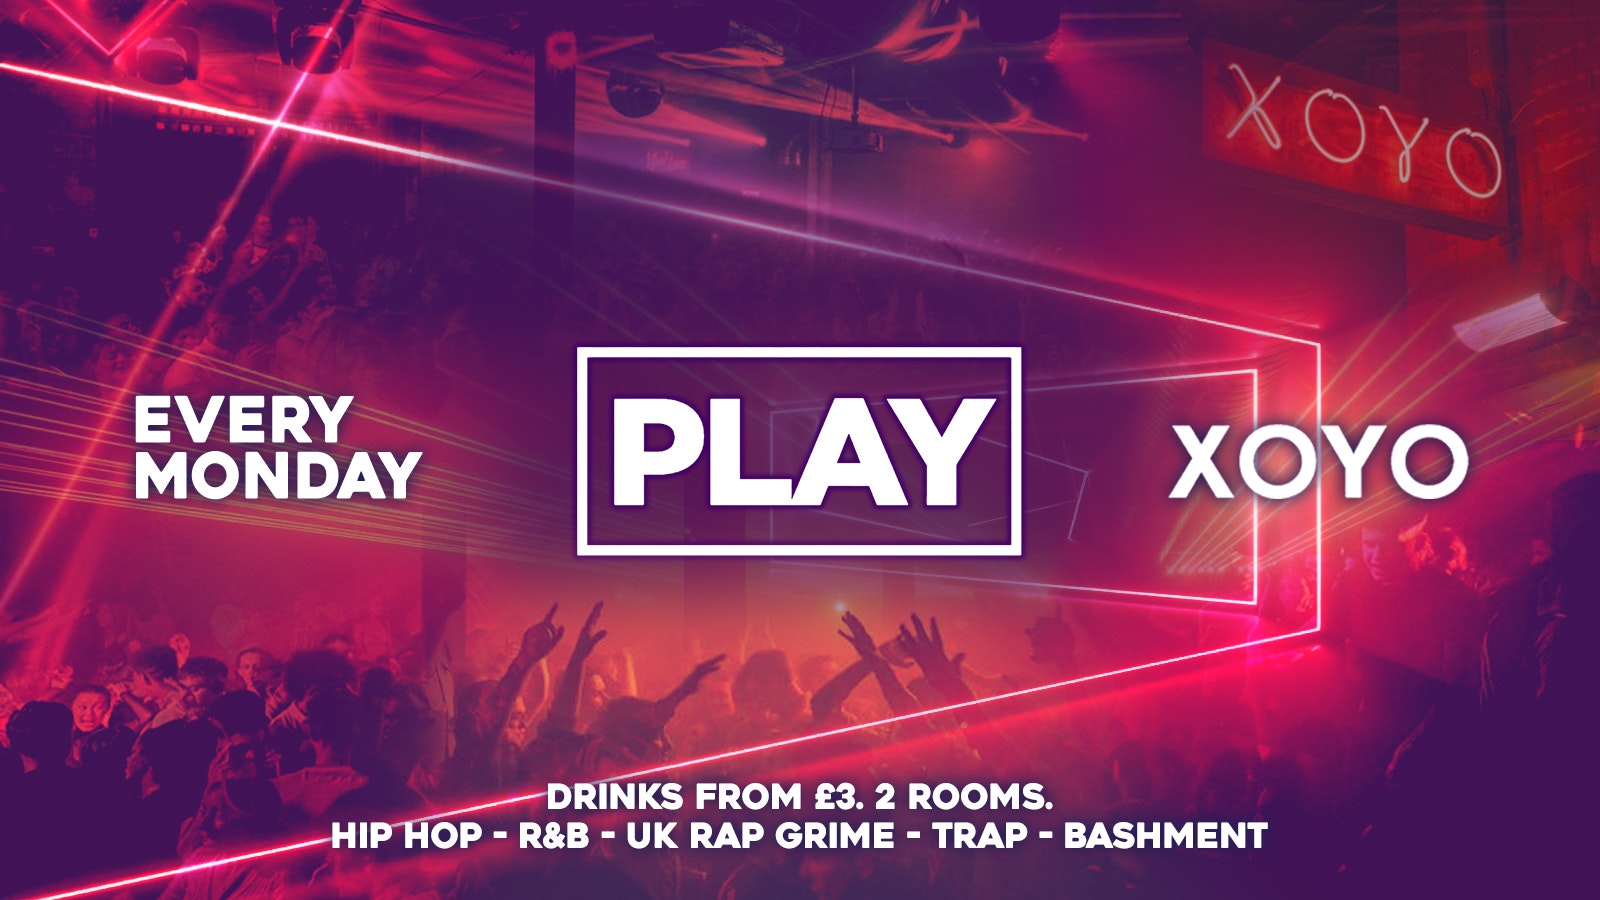 Play London is BACK! The Biggest Weekly Monday Student Night in London // This event will SELL OUT – London Freshers 2021